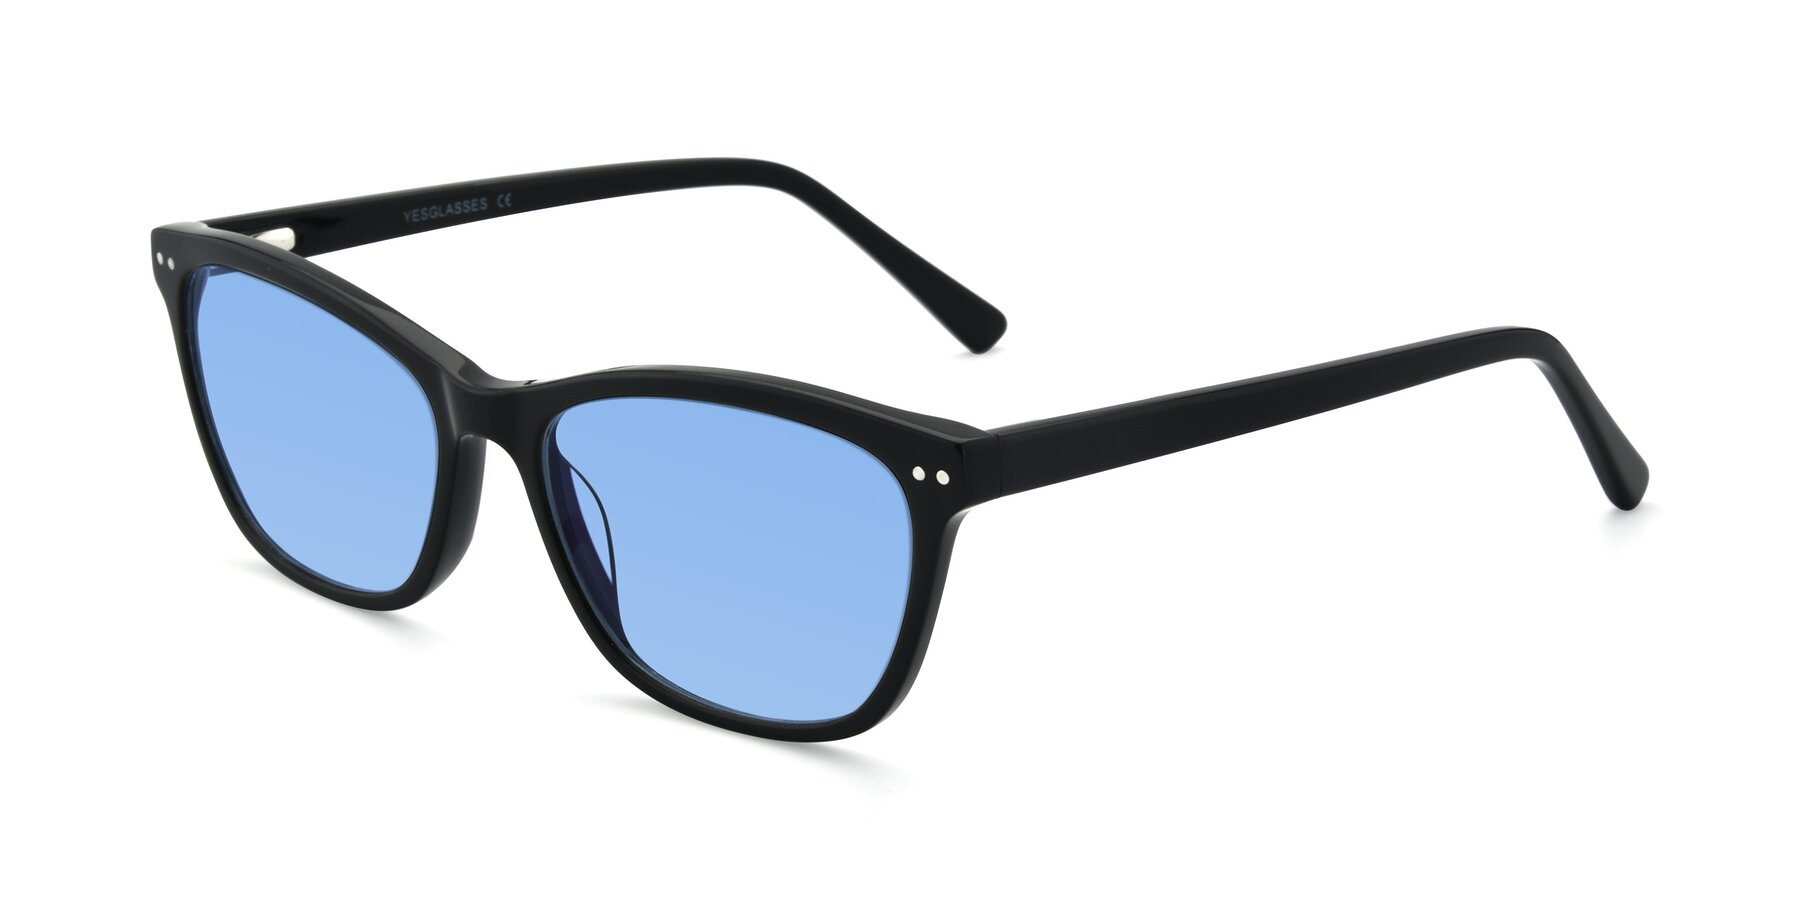 Angle of 17350 in Black with Medium Blue Tinted Lenses